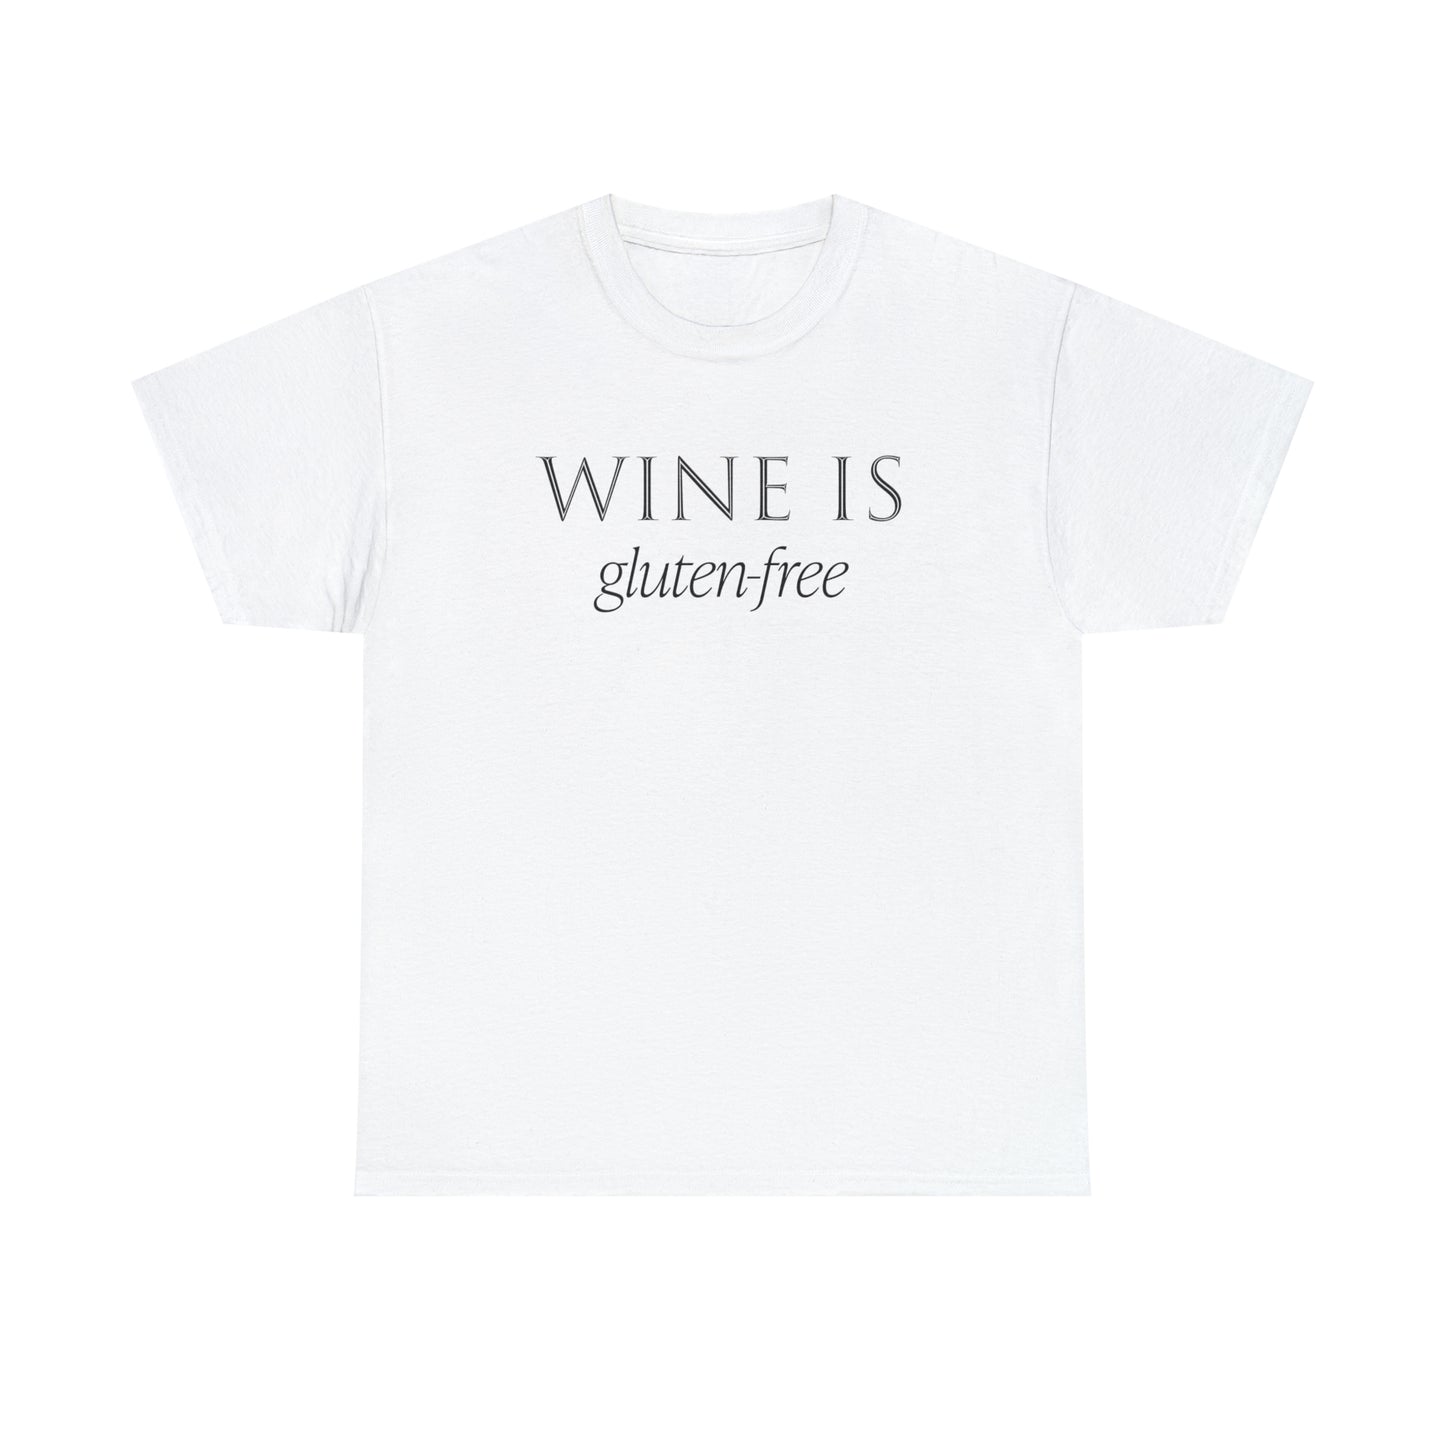 Wine T-Shirt For Gluten Free Wine T Shirt For Sarcastic Wine TShirt For Funny Wine Tee